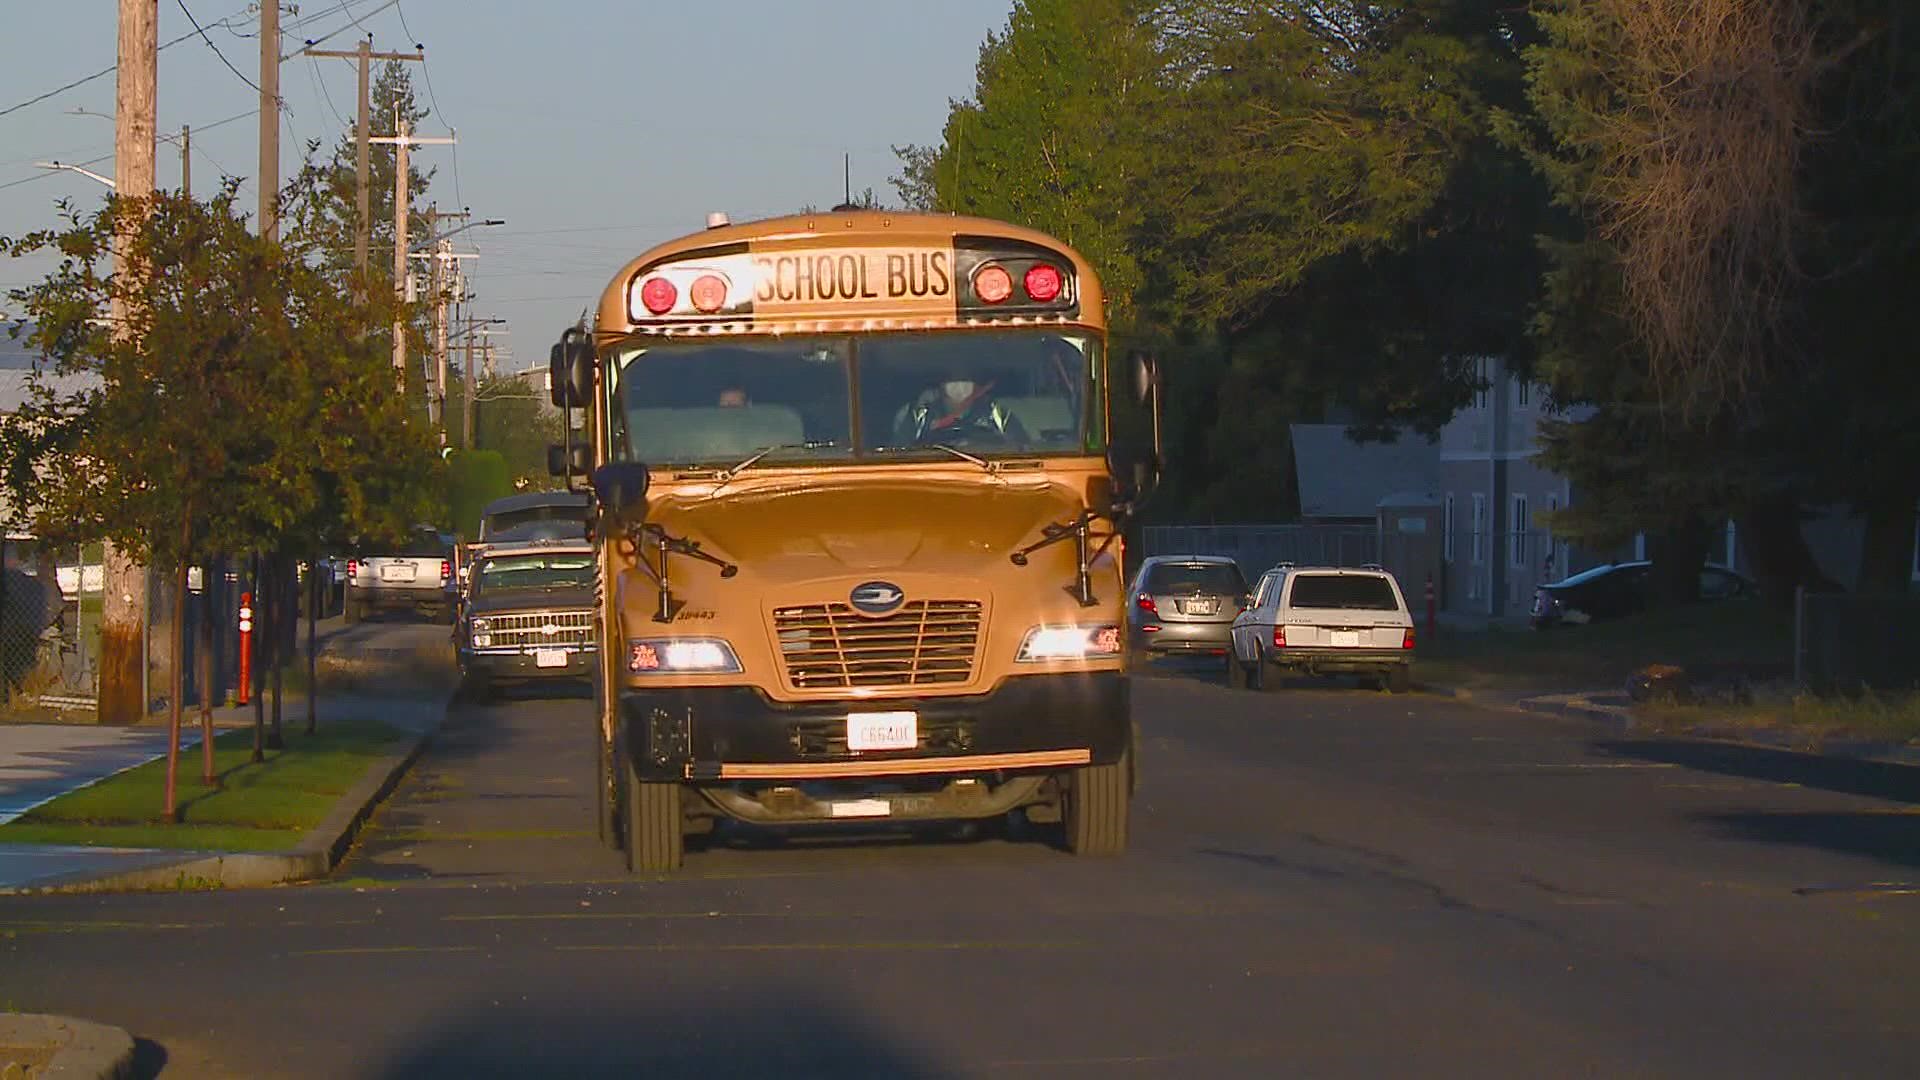 The board discussed partnering with the City to fund a potential third health clinic and approved an increase in the budget for Durham School Bus Services.